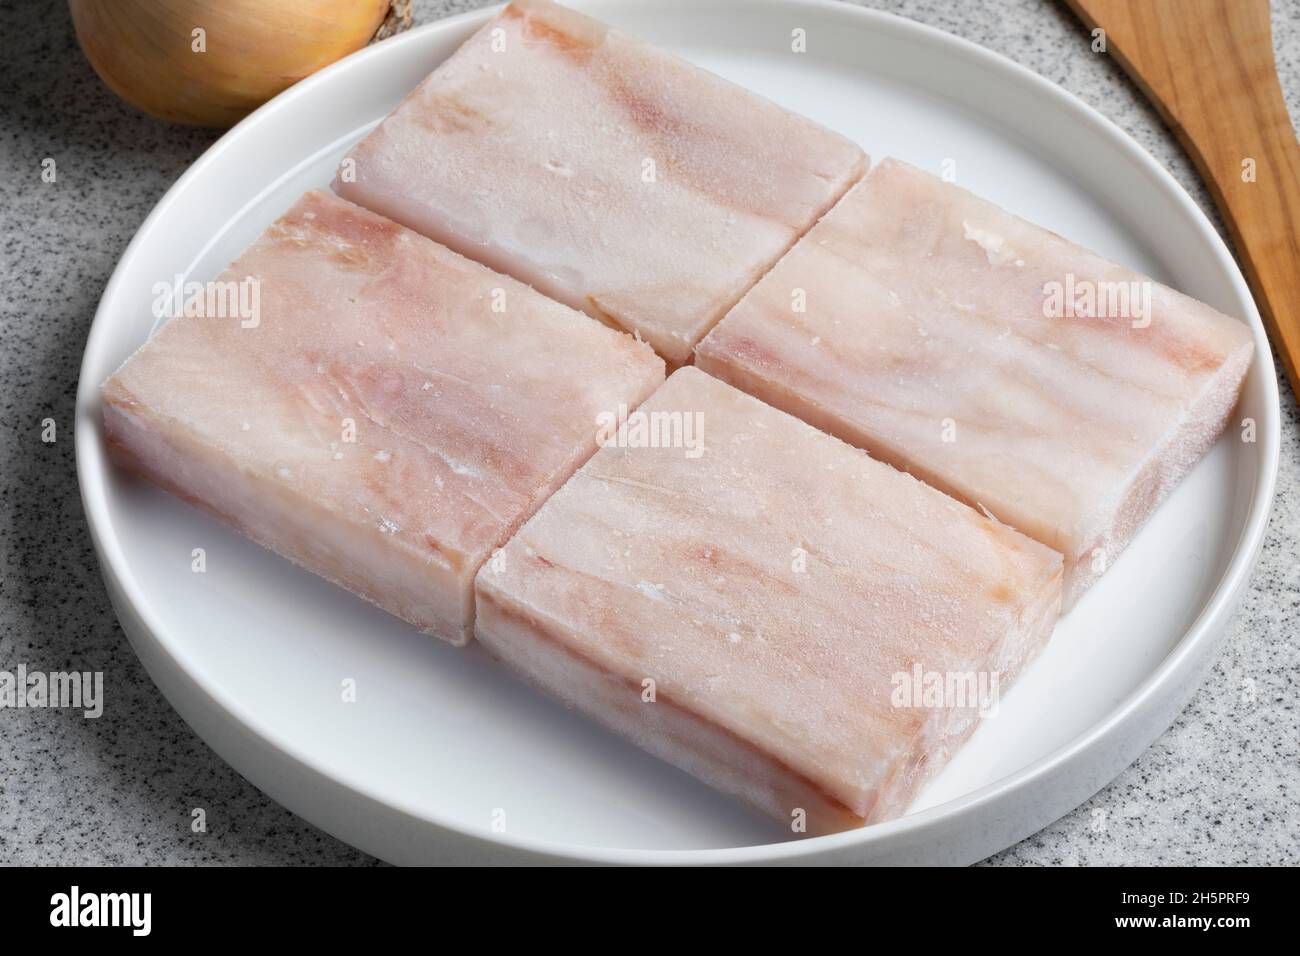 Dish with pieces of frozen Pollock fish fillet as an ingredient for cooking close up Stock Photo